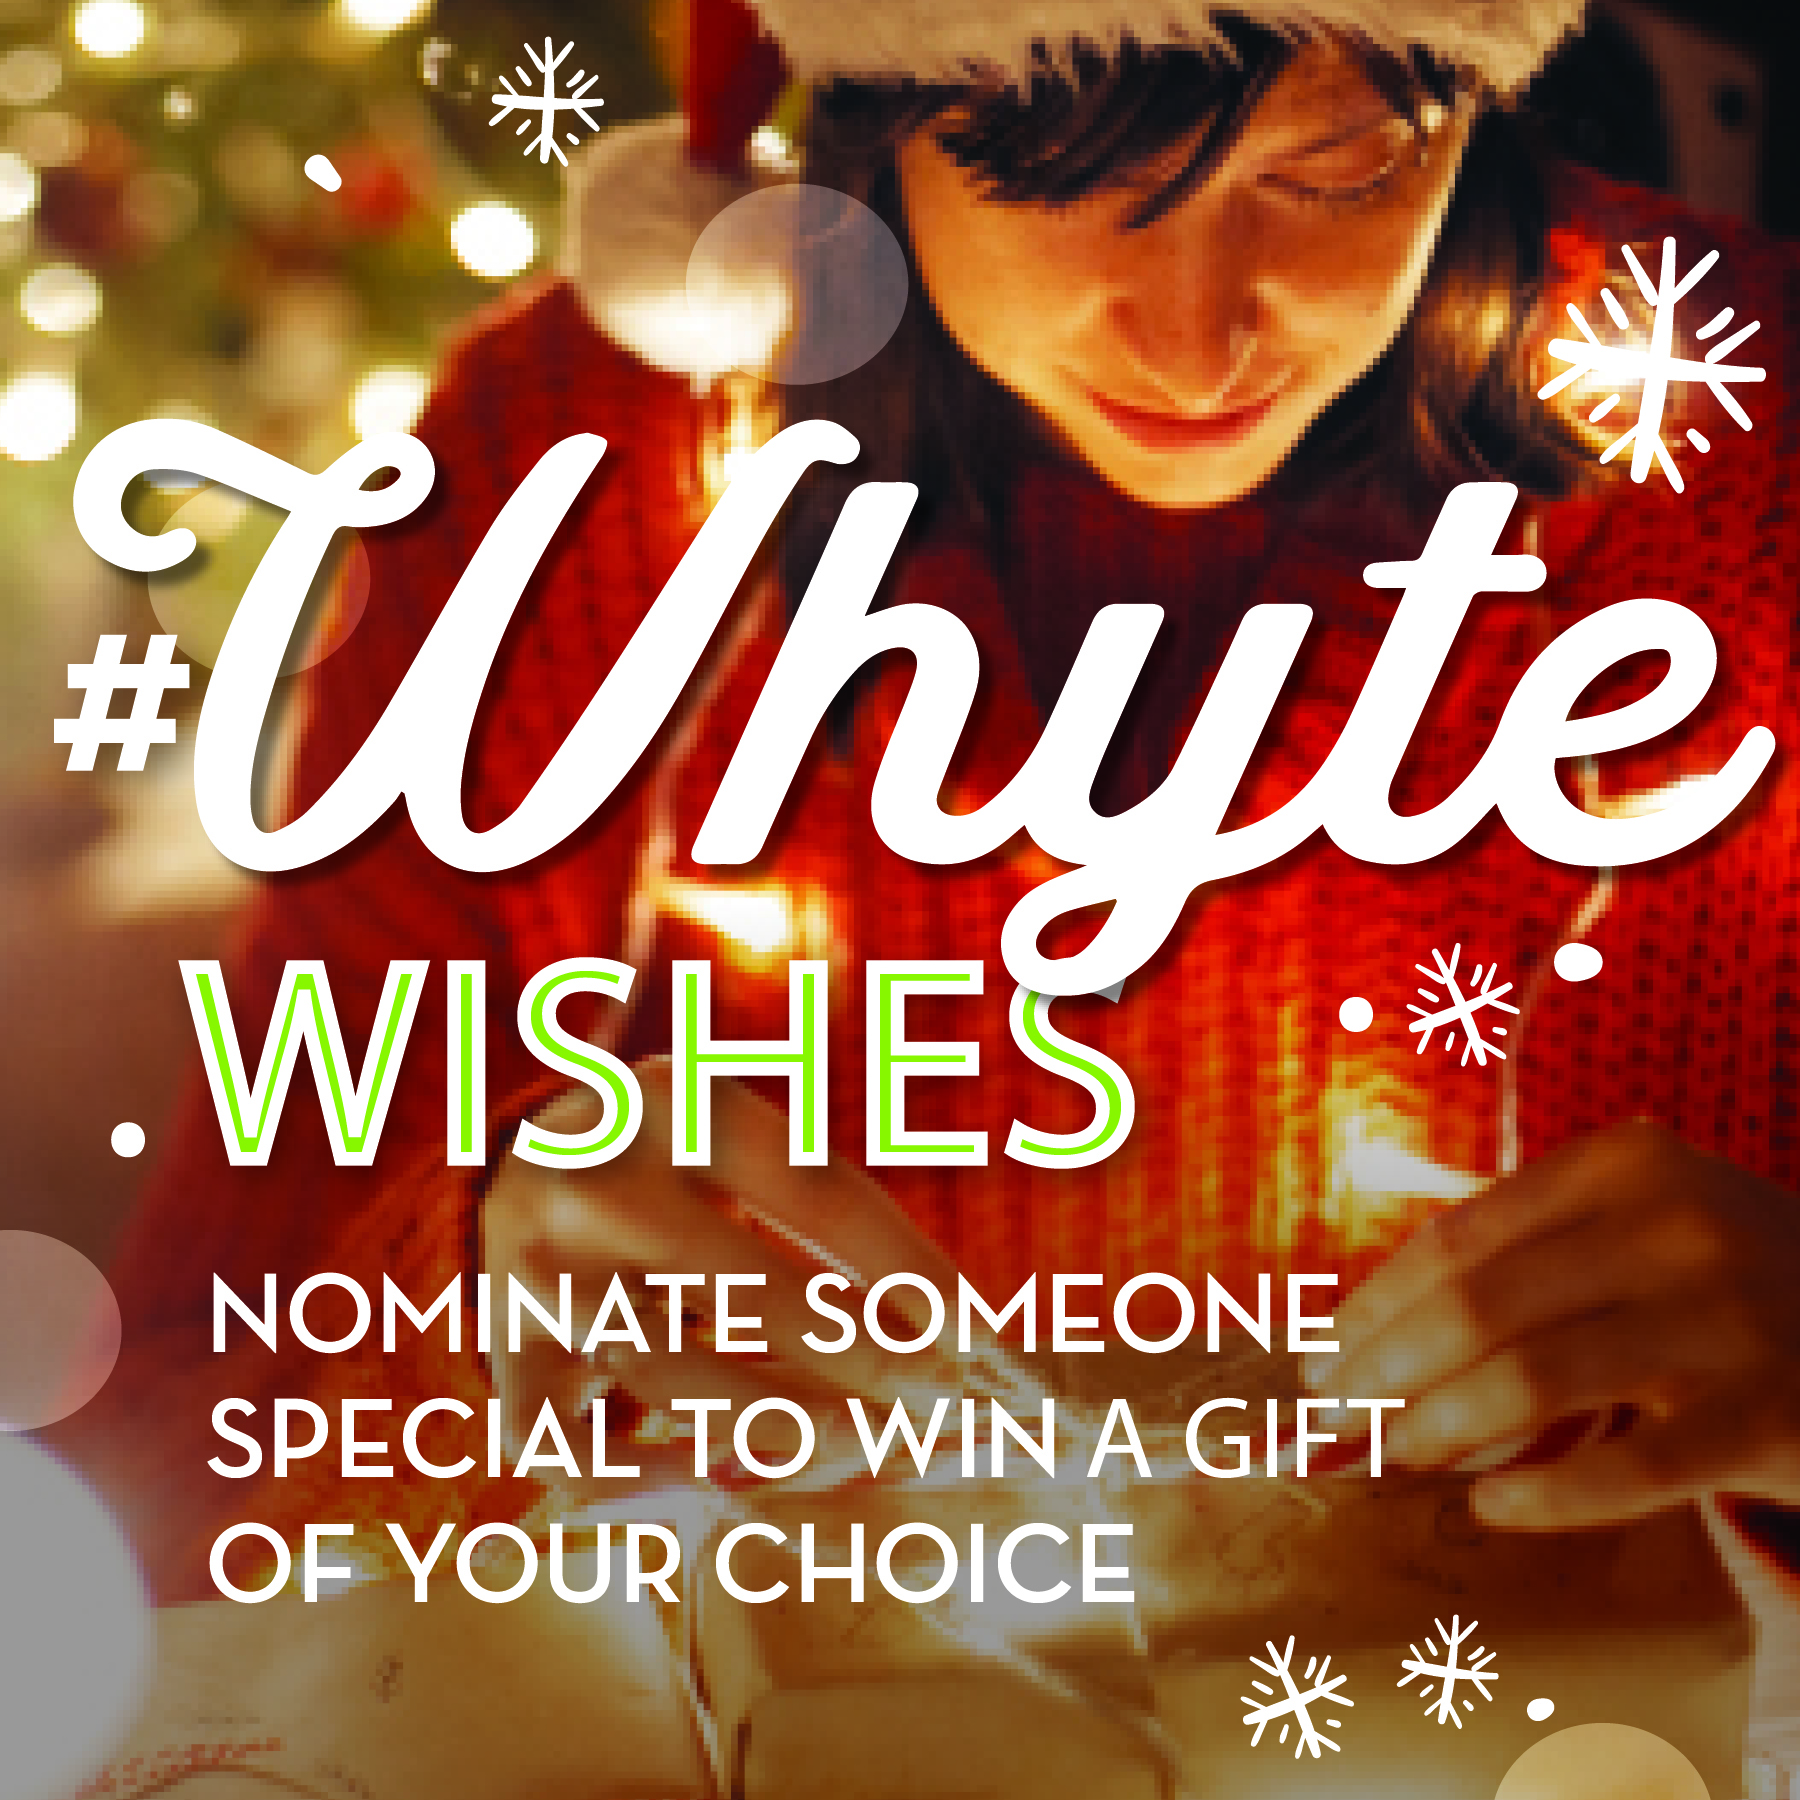 A woman in a Santa hat wraps a gift while glowing white holiday lights surround her, text reads Whyte Wishes Nominate someone special to win a gift of your choice